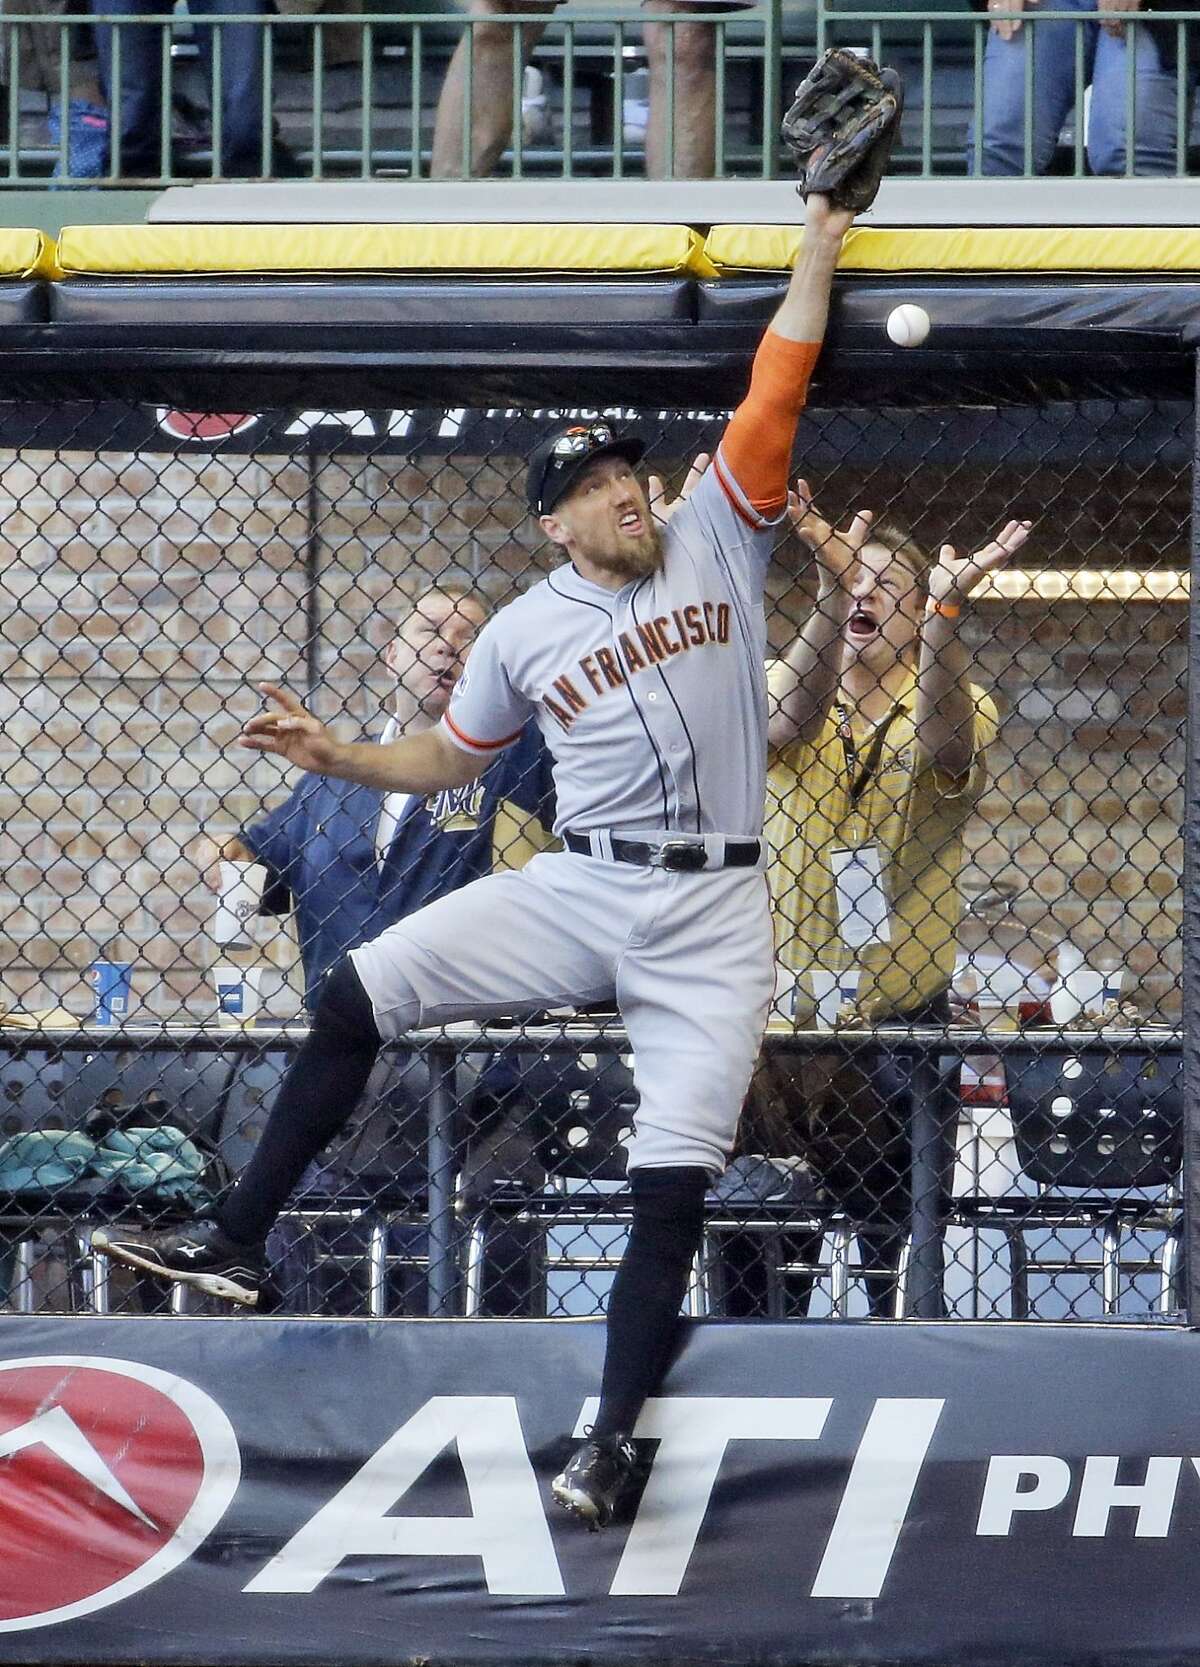 San Francisco Giants right fielder Hunter Pence can't catch a ball hit by Milwaukee Brewers' Khris Davis during the fourth inning of a baseball game Wednesday, May 27, 2015, in Milwaukee. (AP Photo/Morry Gash)